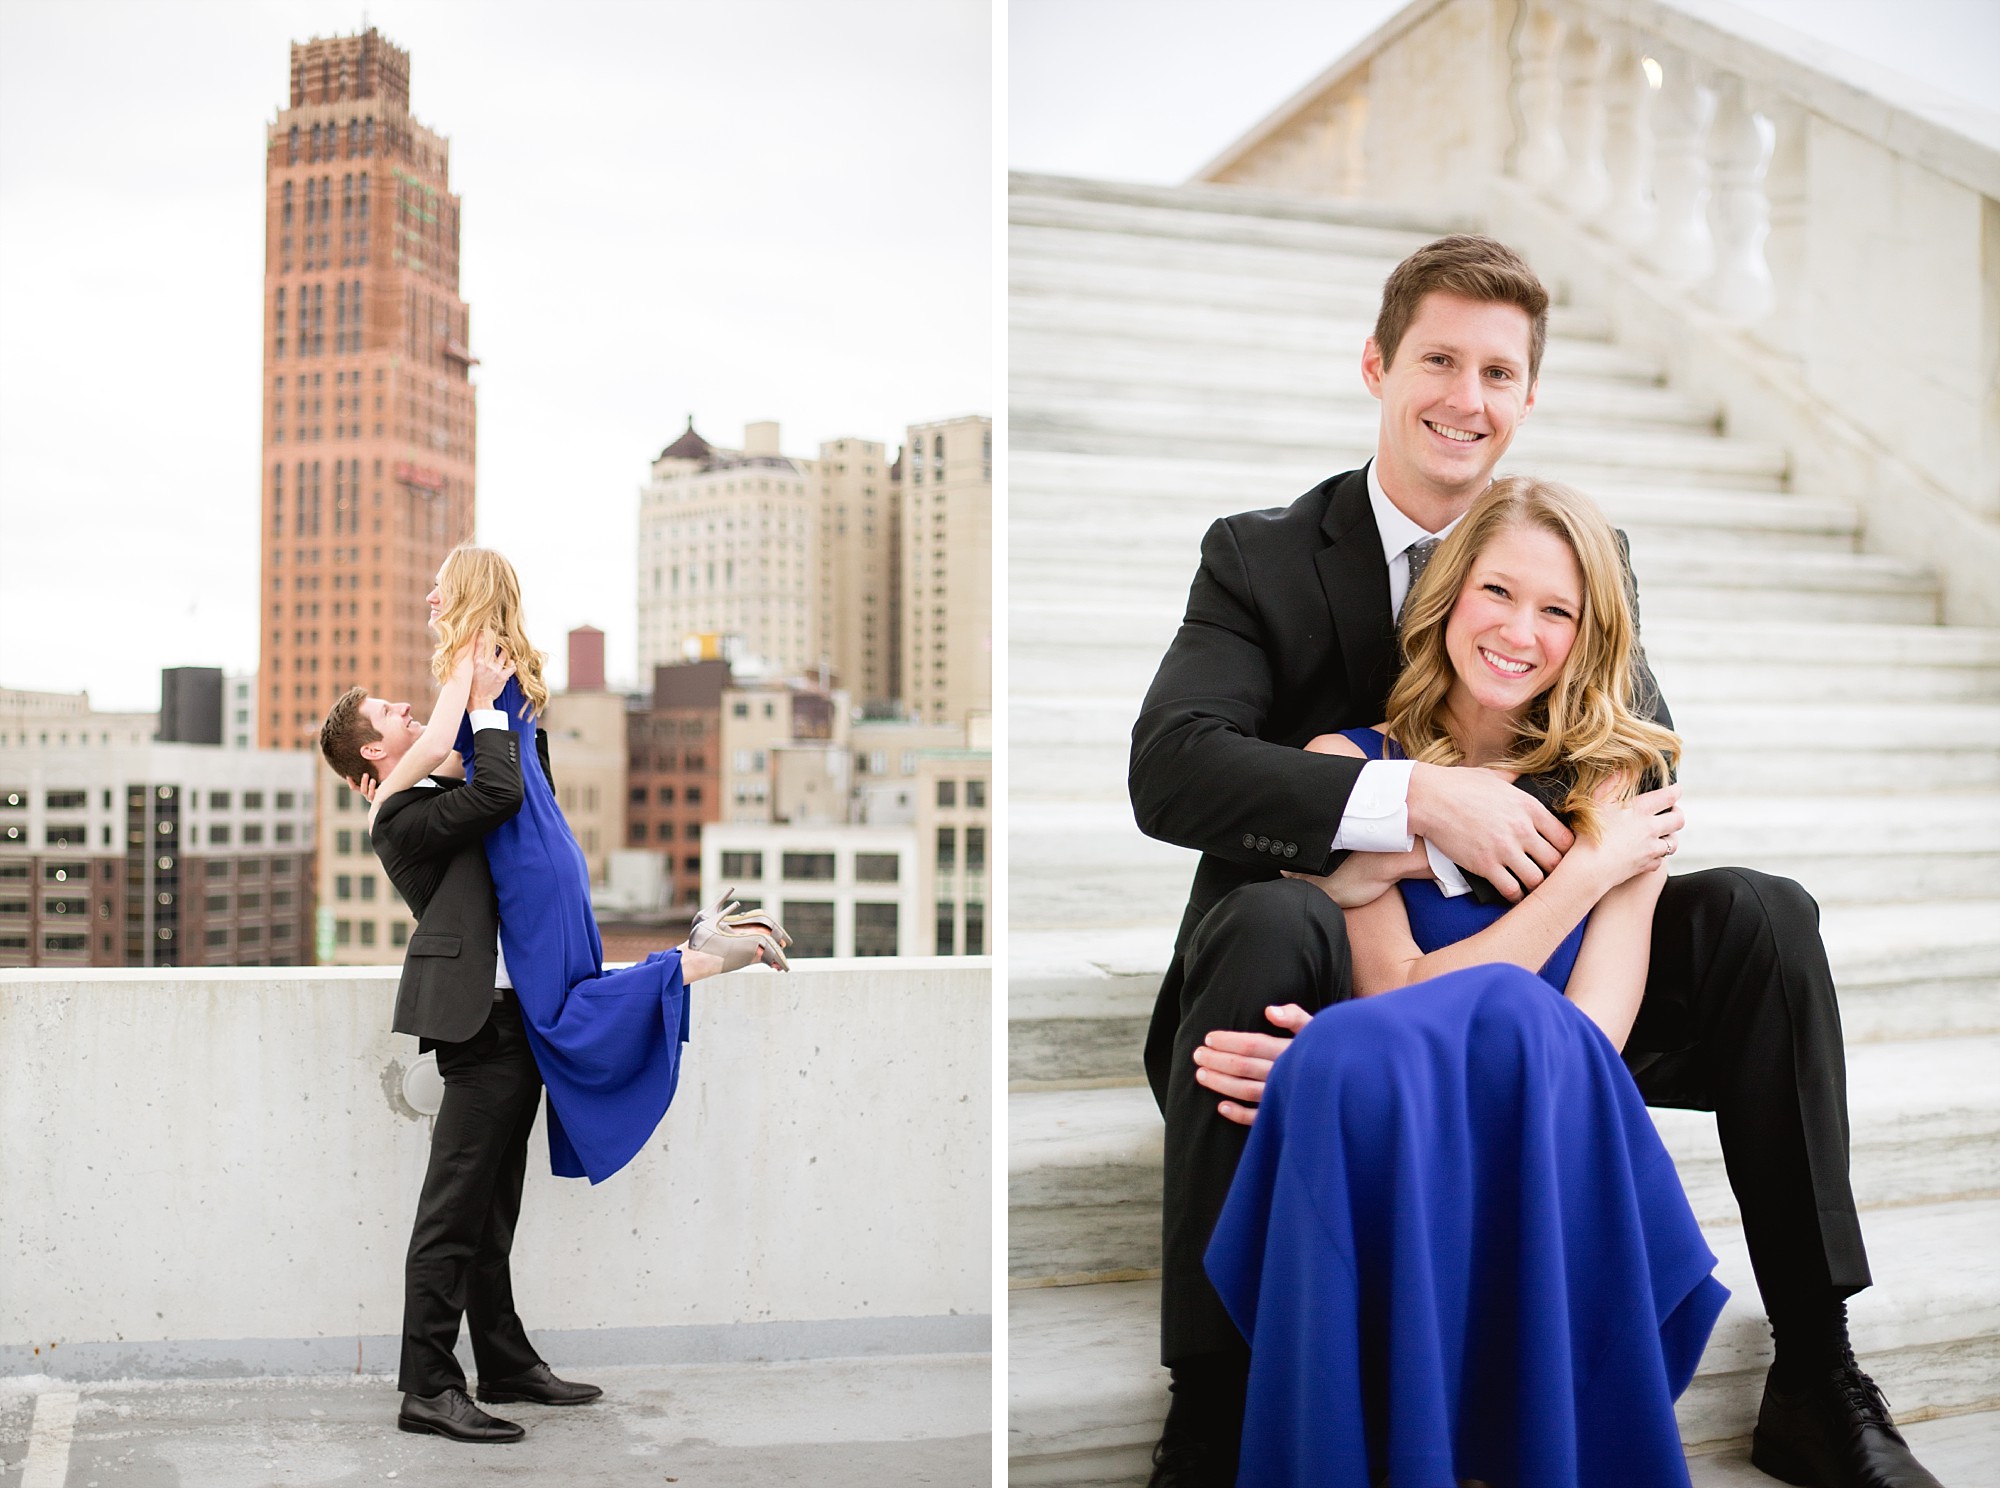 A Winter anniversary session in Downtown Detroit, Michigan by Breanne Rochelle Photography.